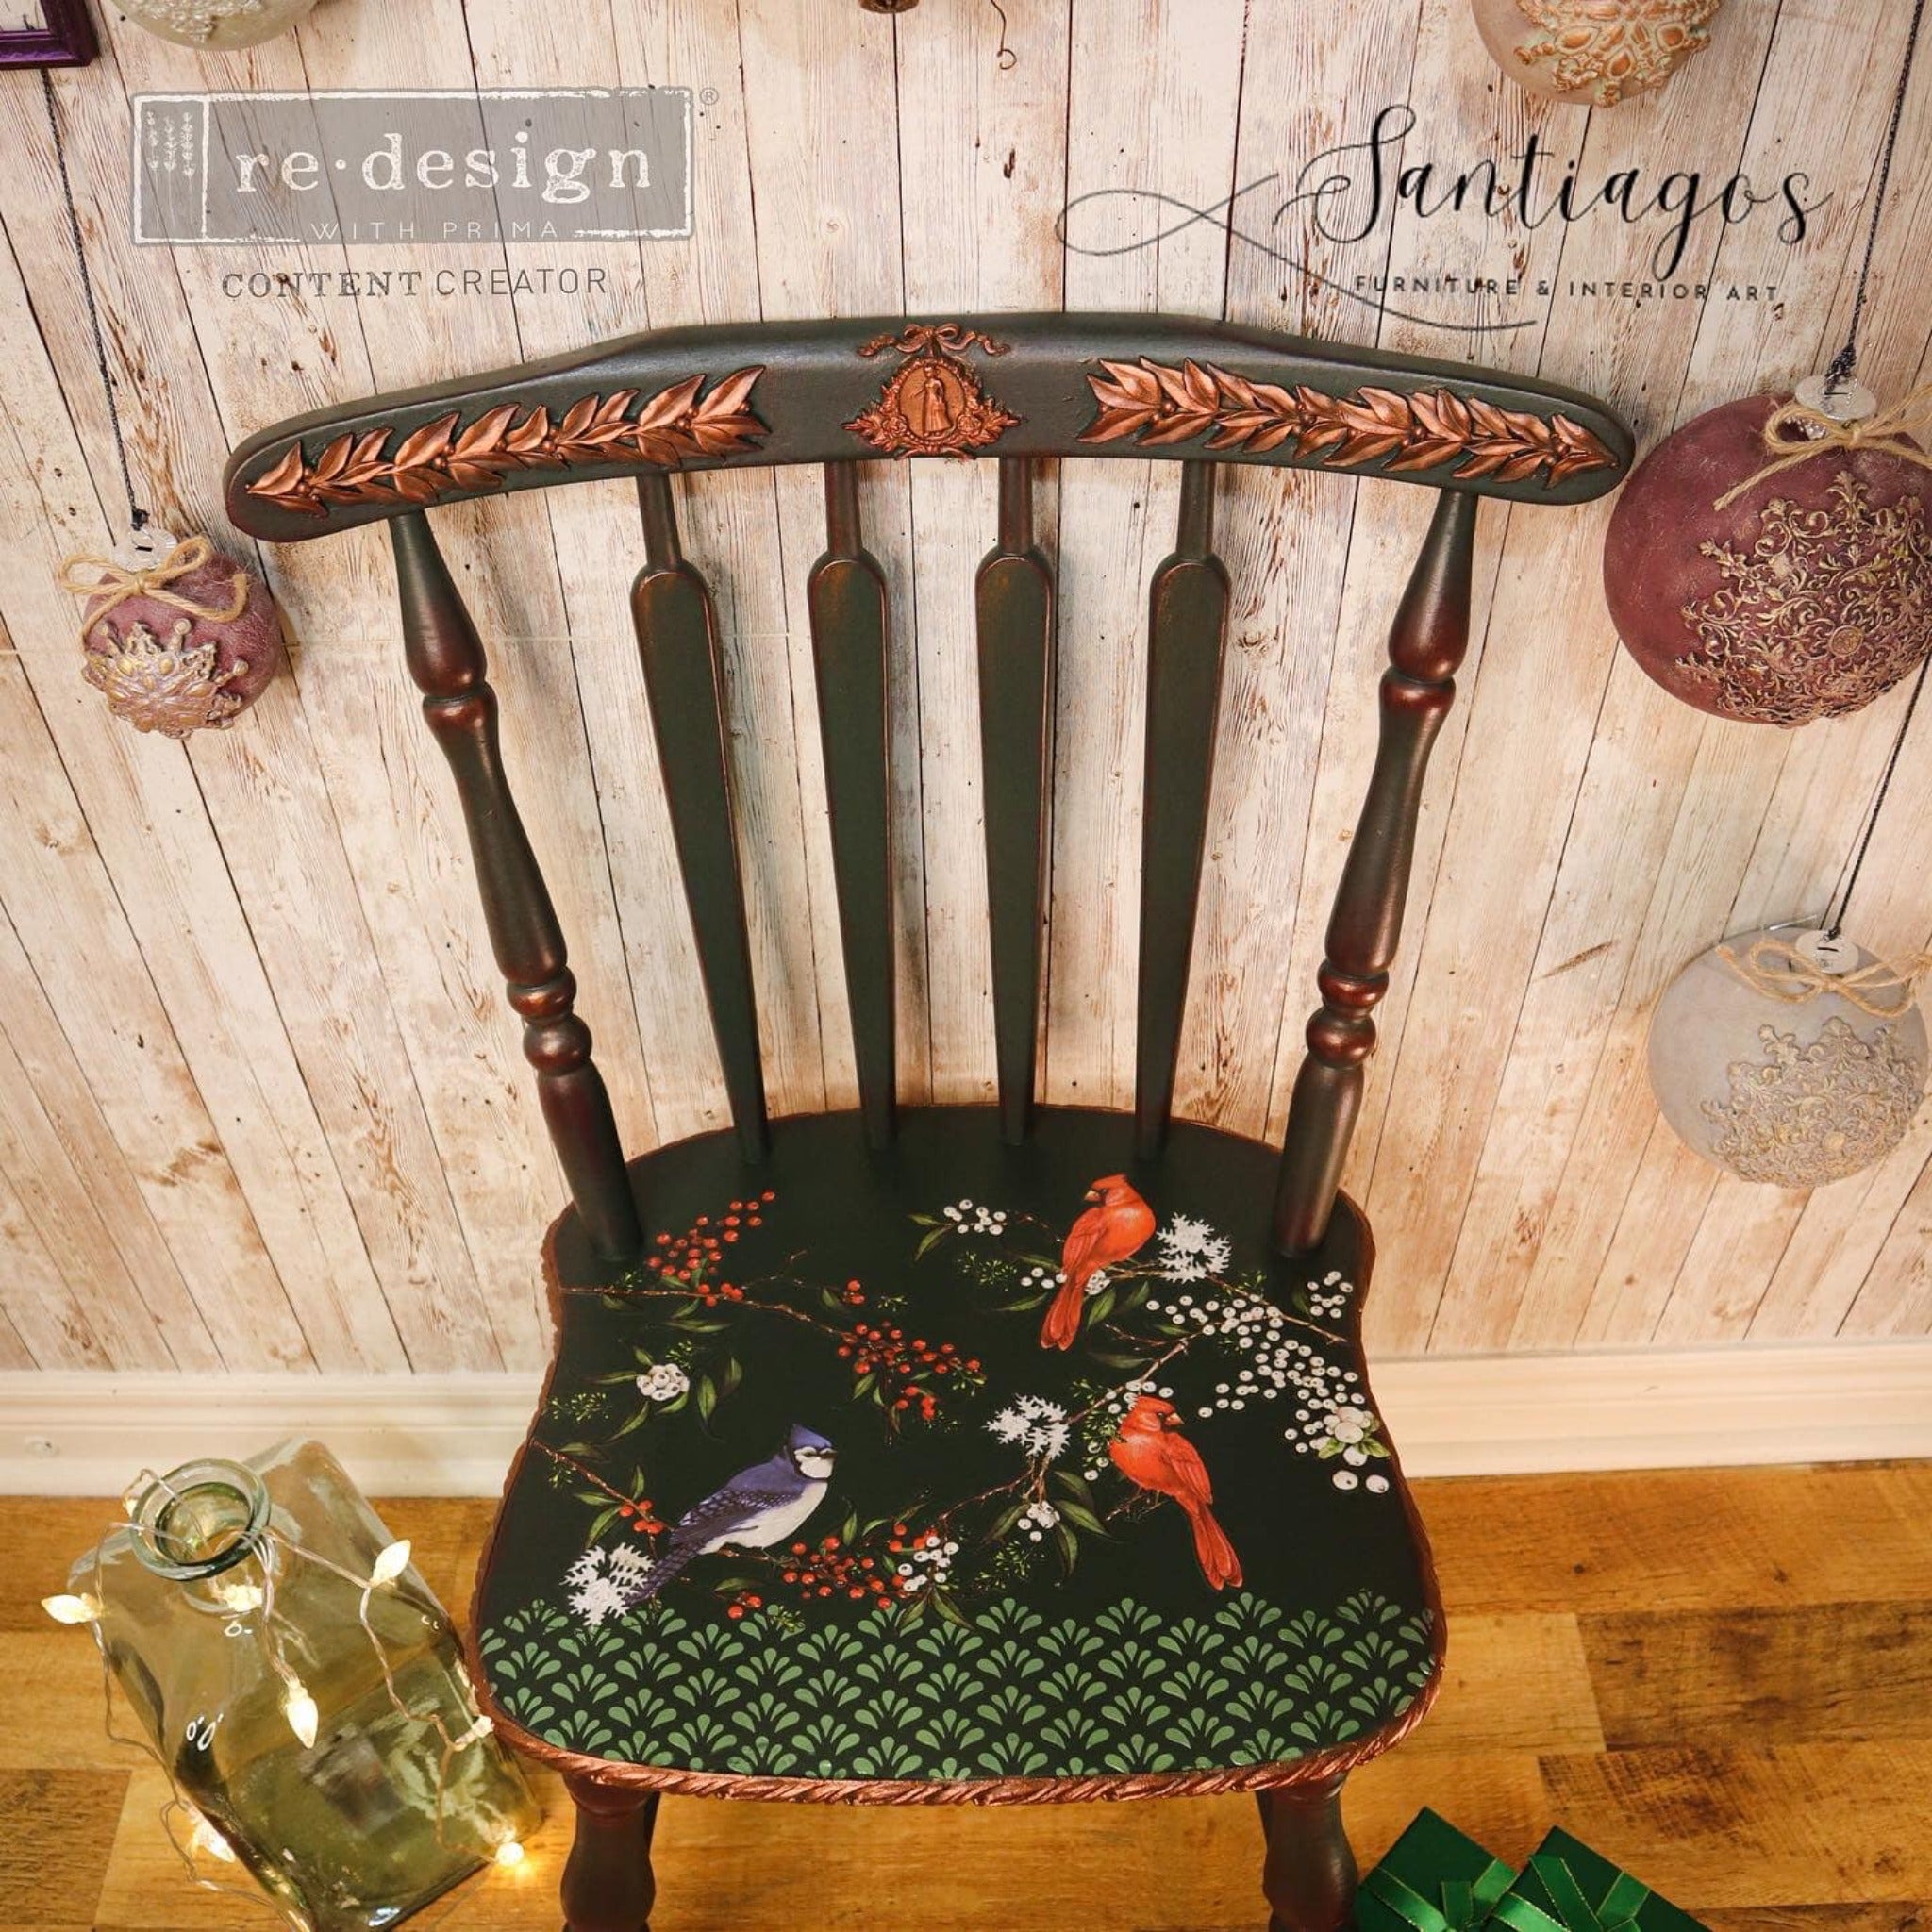 A vintage wood kitchen chair refurbished by Santiago's Furniture Interior Art is painted dark pine green and features ReDesign with Prima's Winterberry small transfer on its seat.